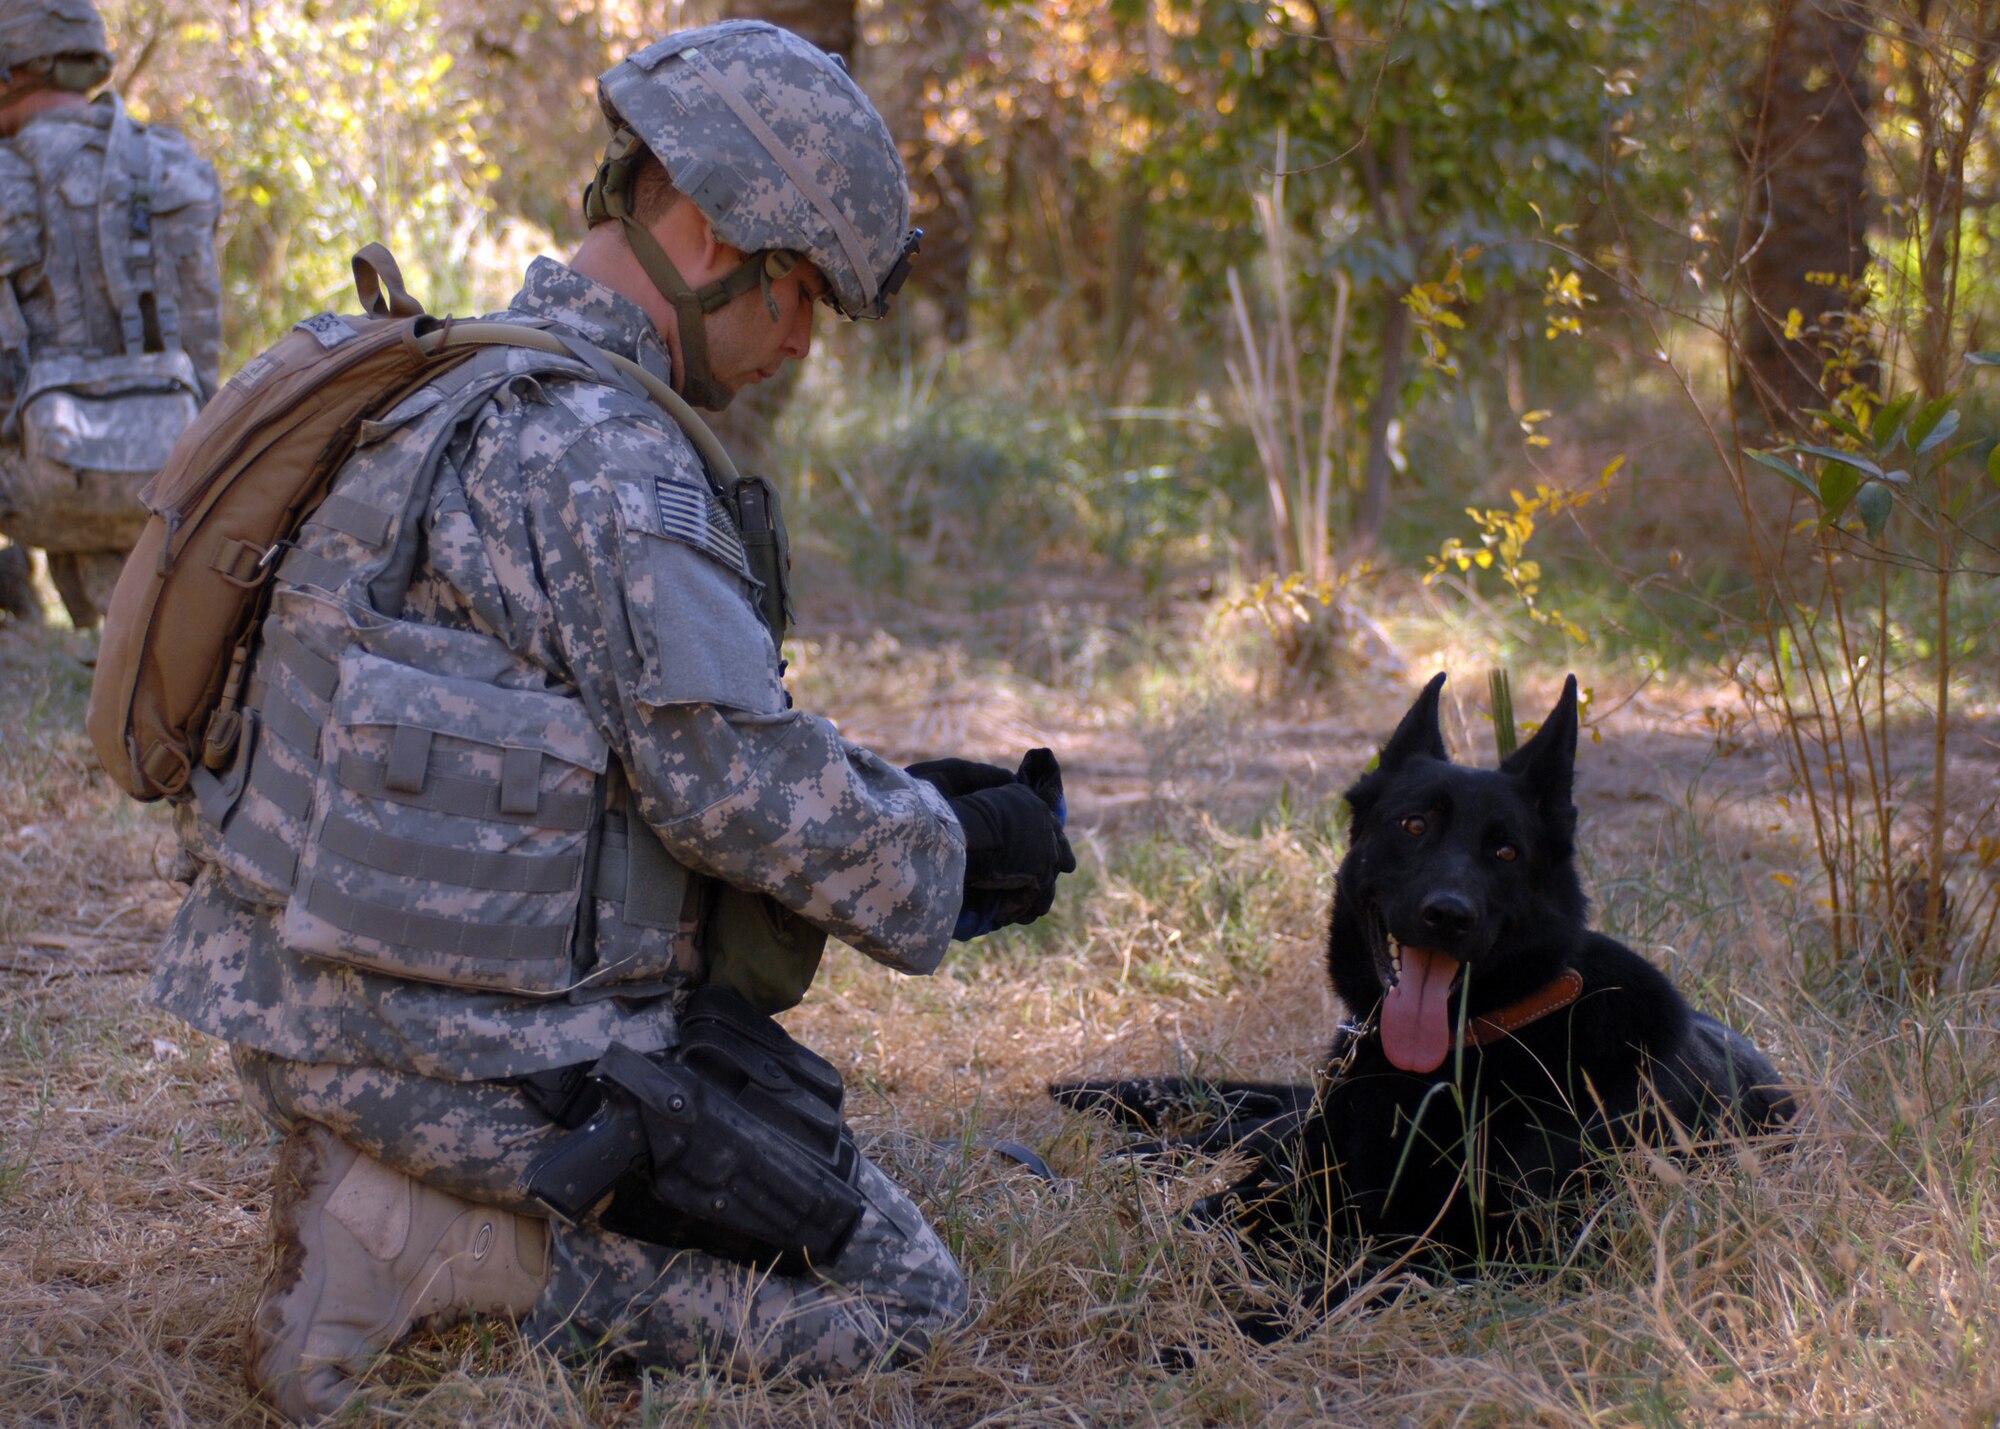 Tech Sgt. Michael Jones and military working dog Blacky pause during patrol in Iraq for a water break. (Courtesy photo)